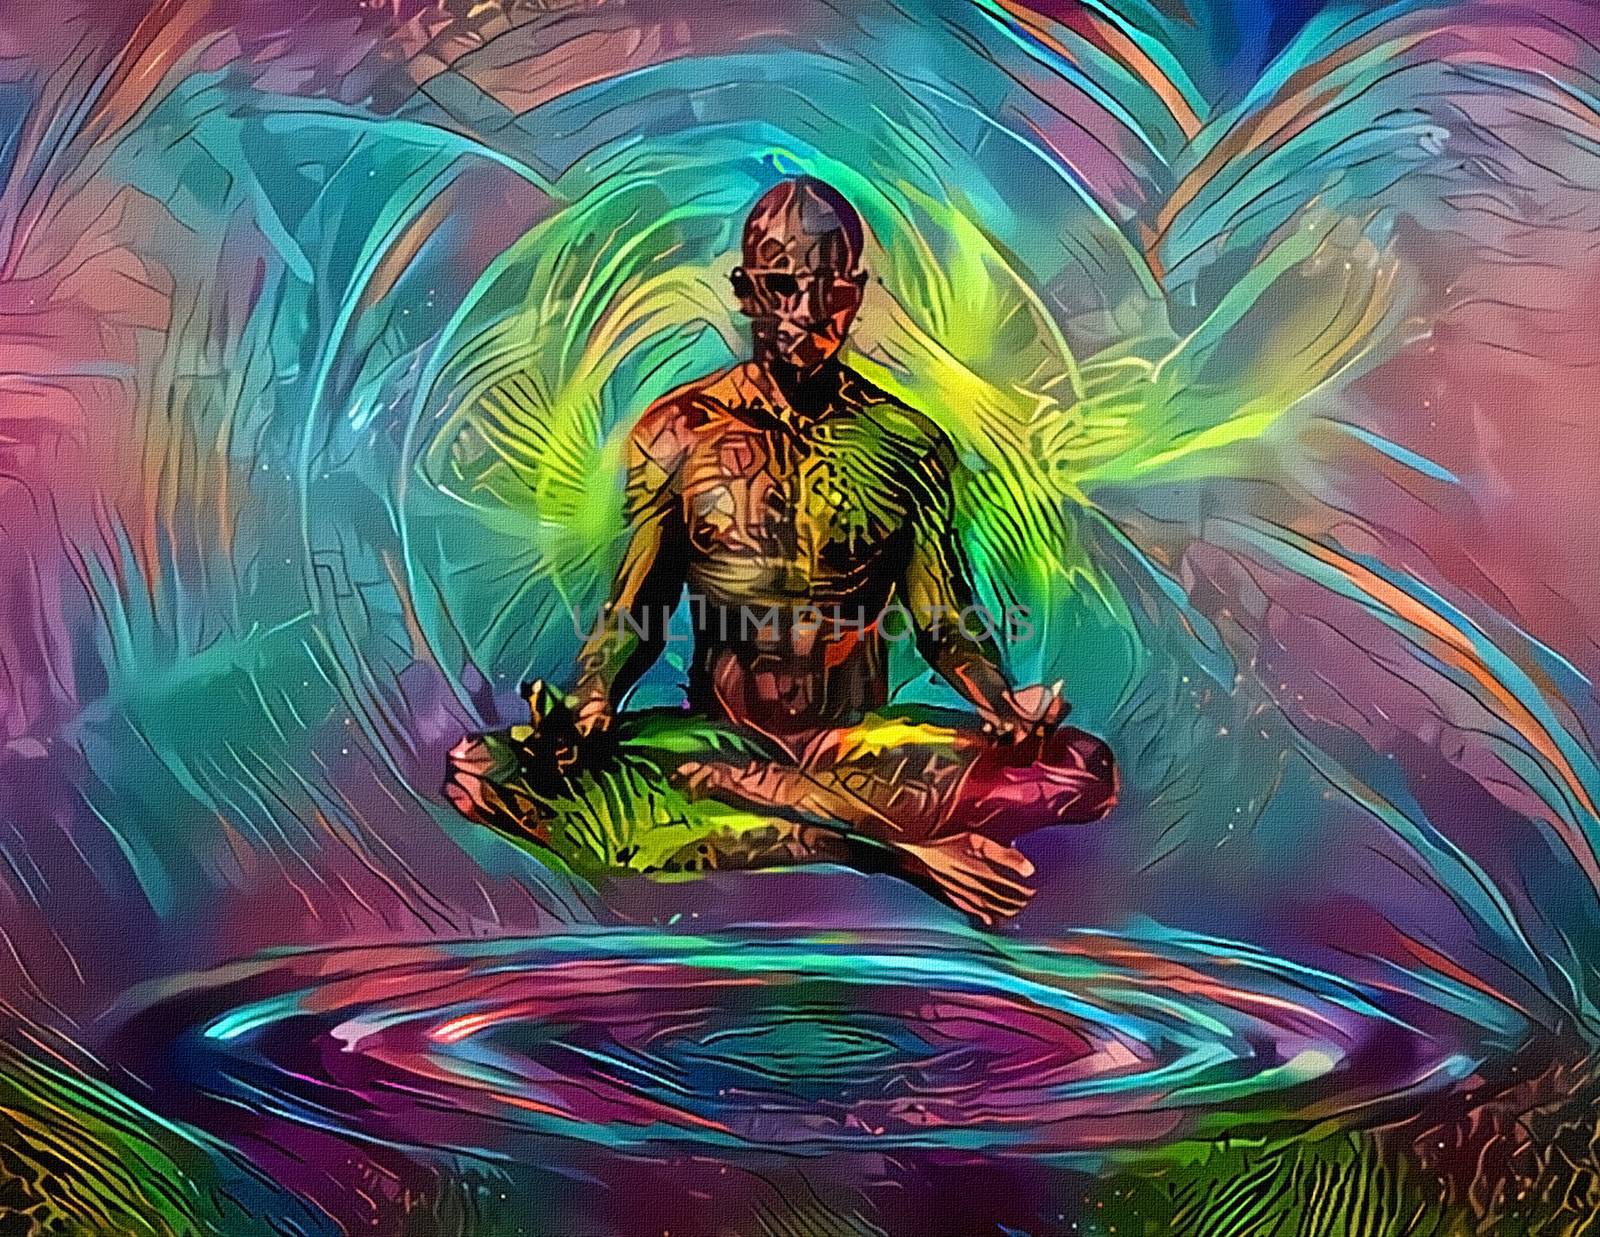 Man hovering above water in lotus pose. Colorful background. Meditation